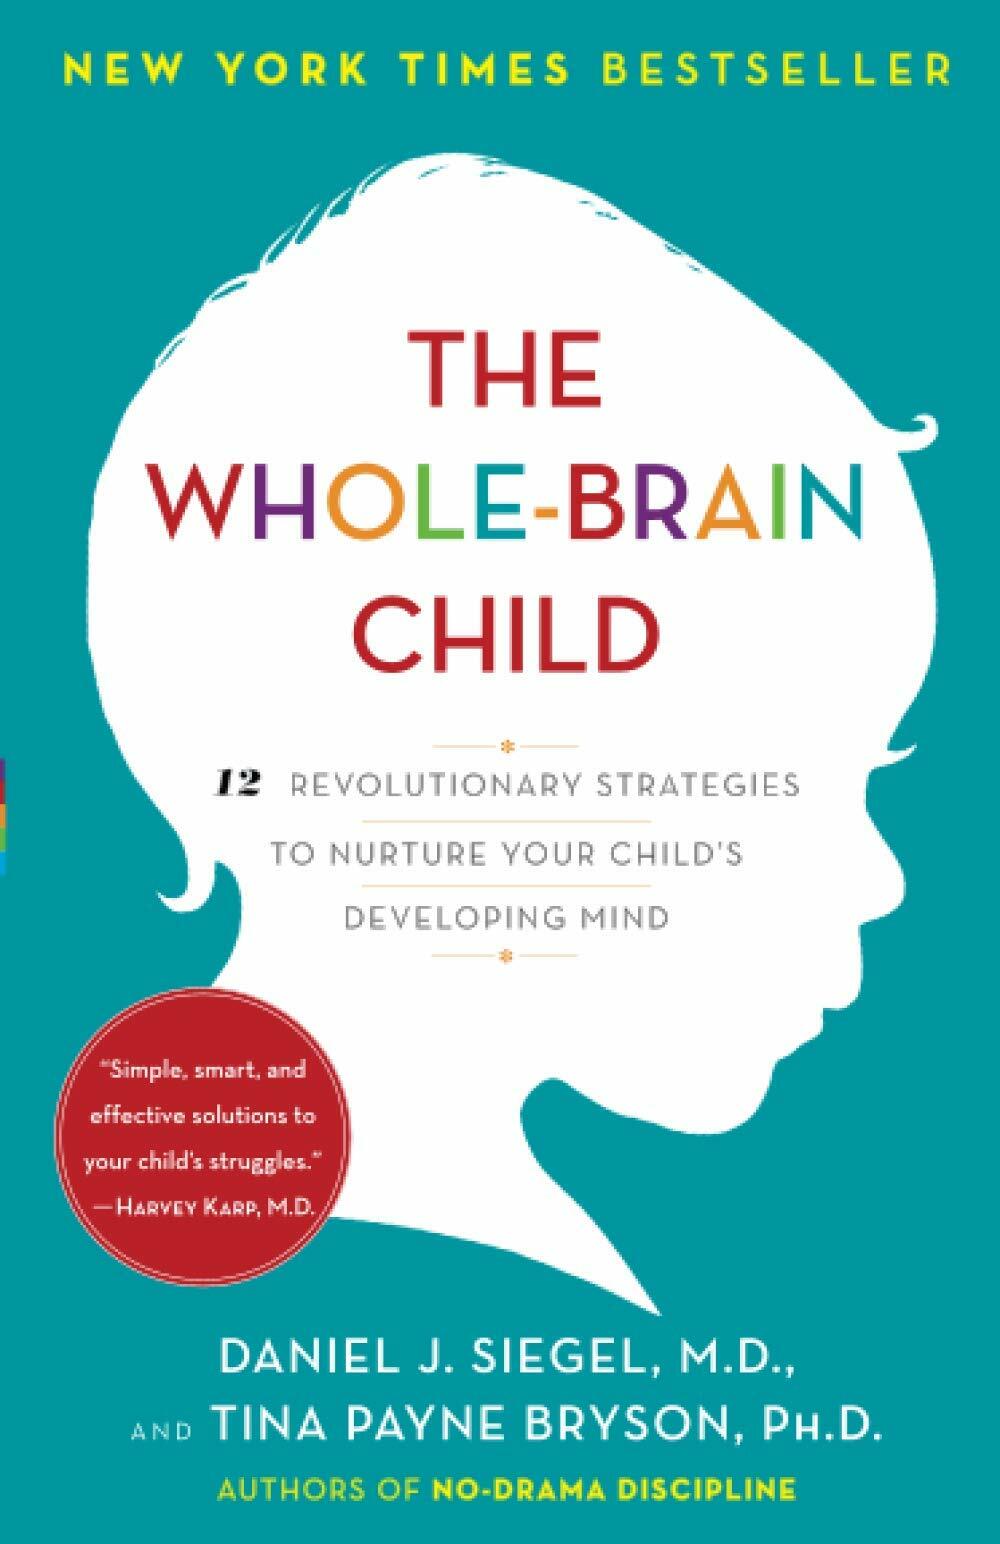 The Whole-Brain Child: 12 Revolutionary Strategies to Nurture Your Childs Developing Mind (Paperback)